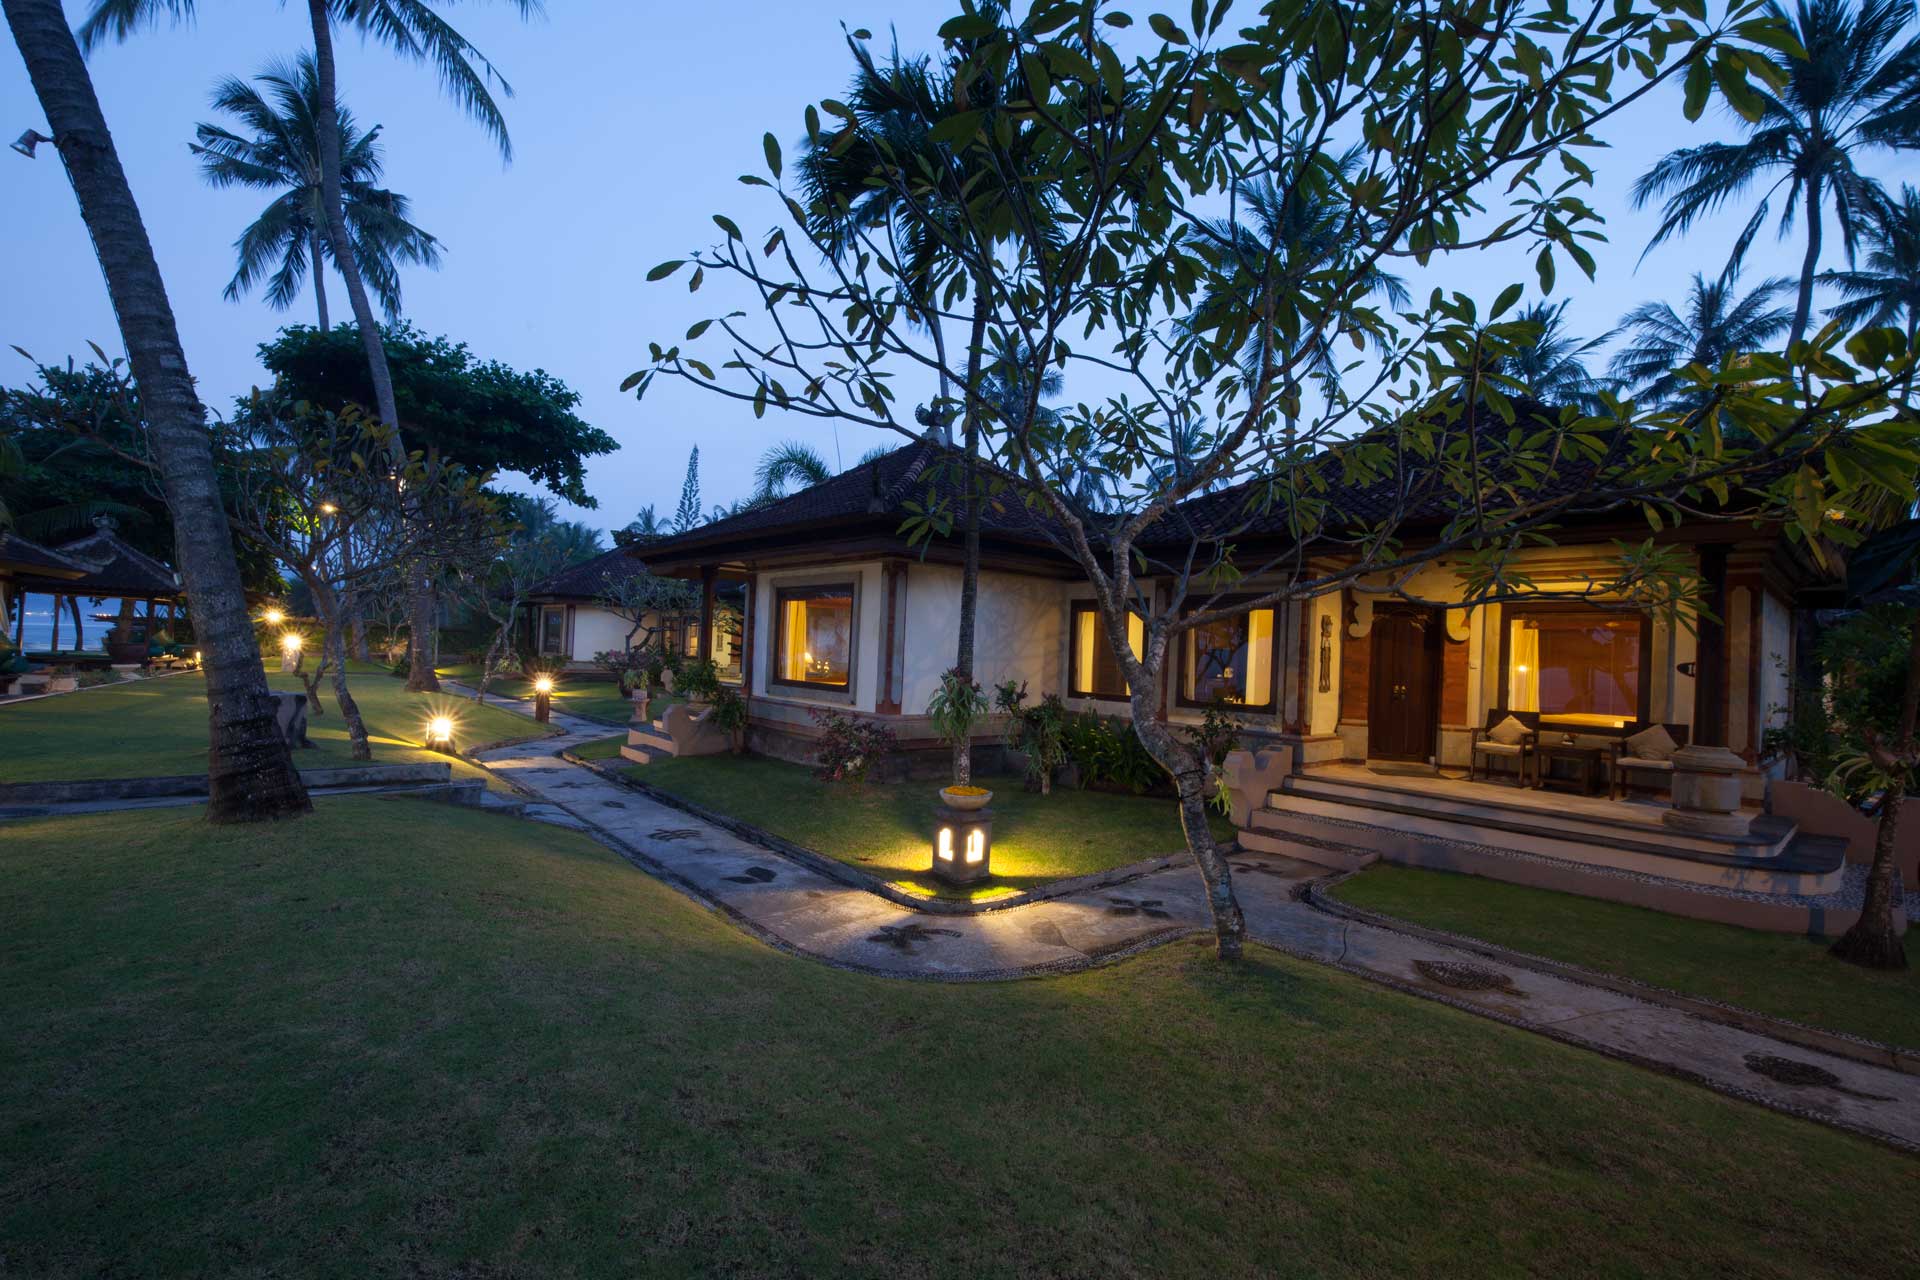 Puri Bagus Candidasa rooms and garden at night